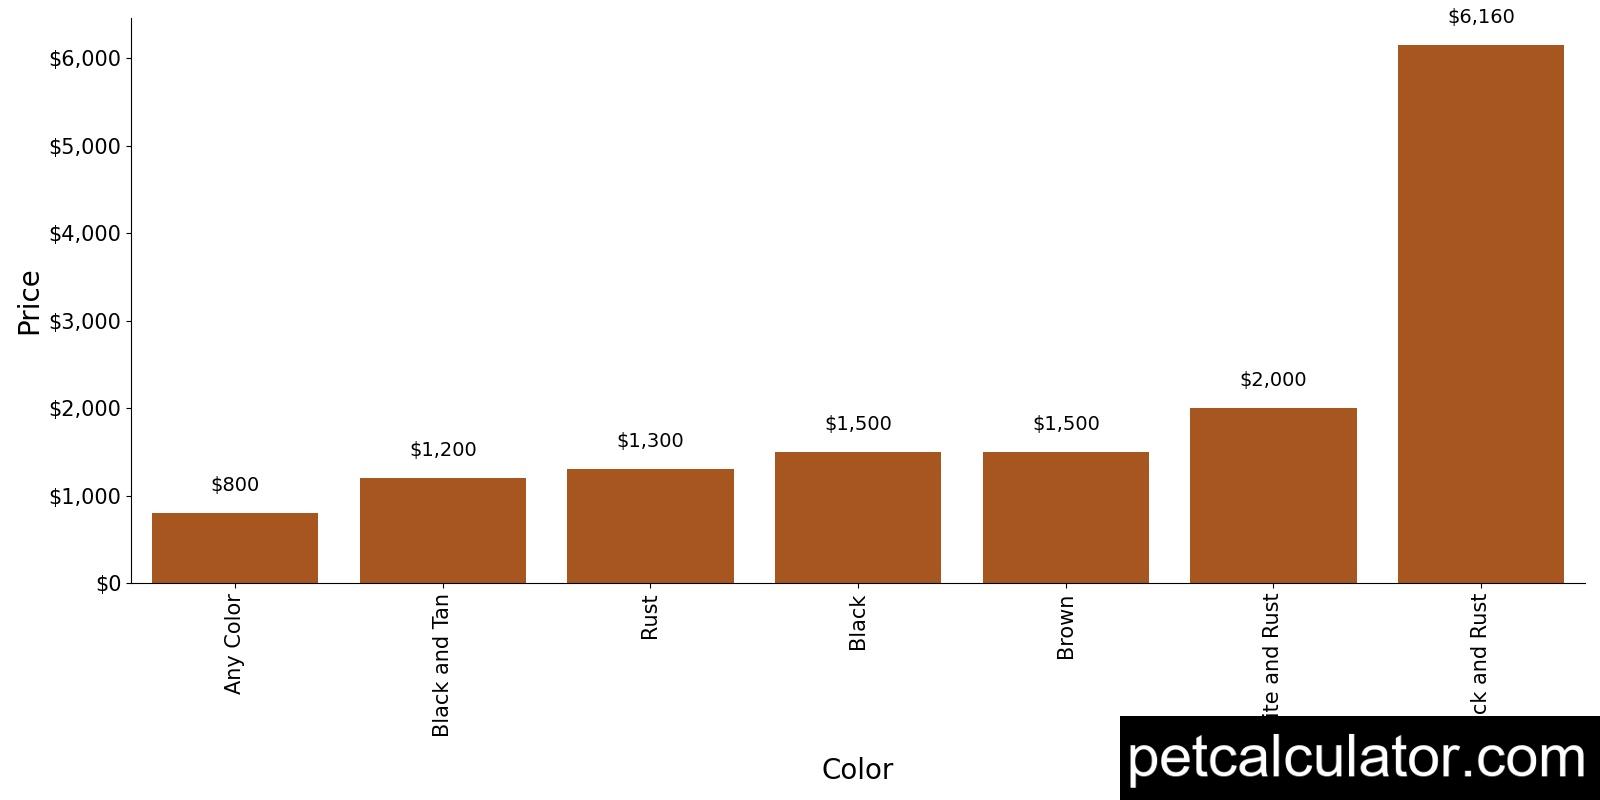 Price of Doodleman Pinscher by Color 